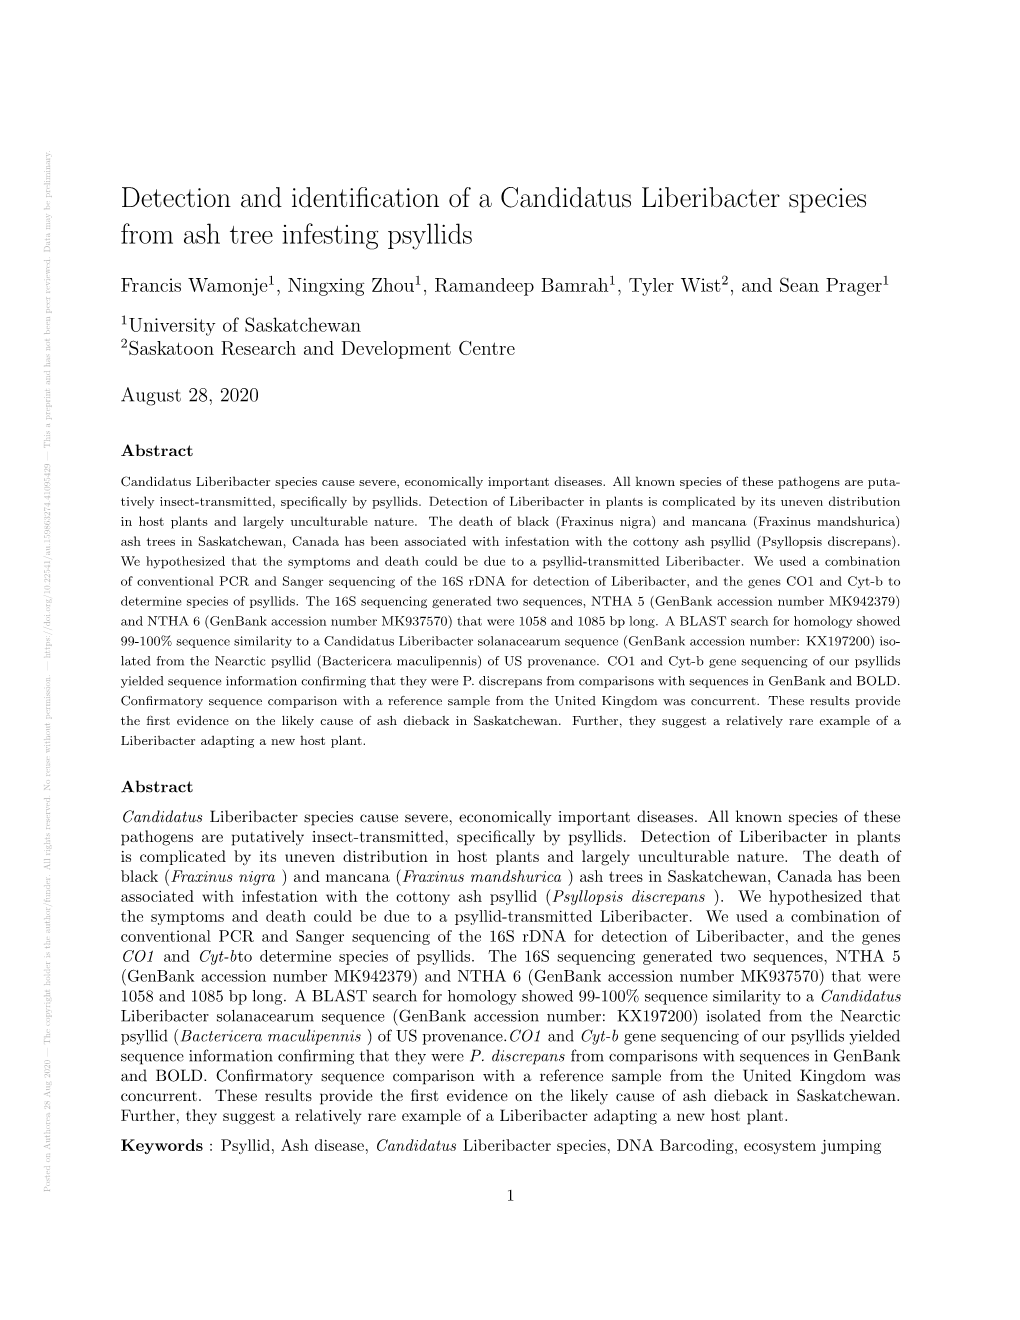 Detection and Identification of a Candidatus Liberibacter Species